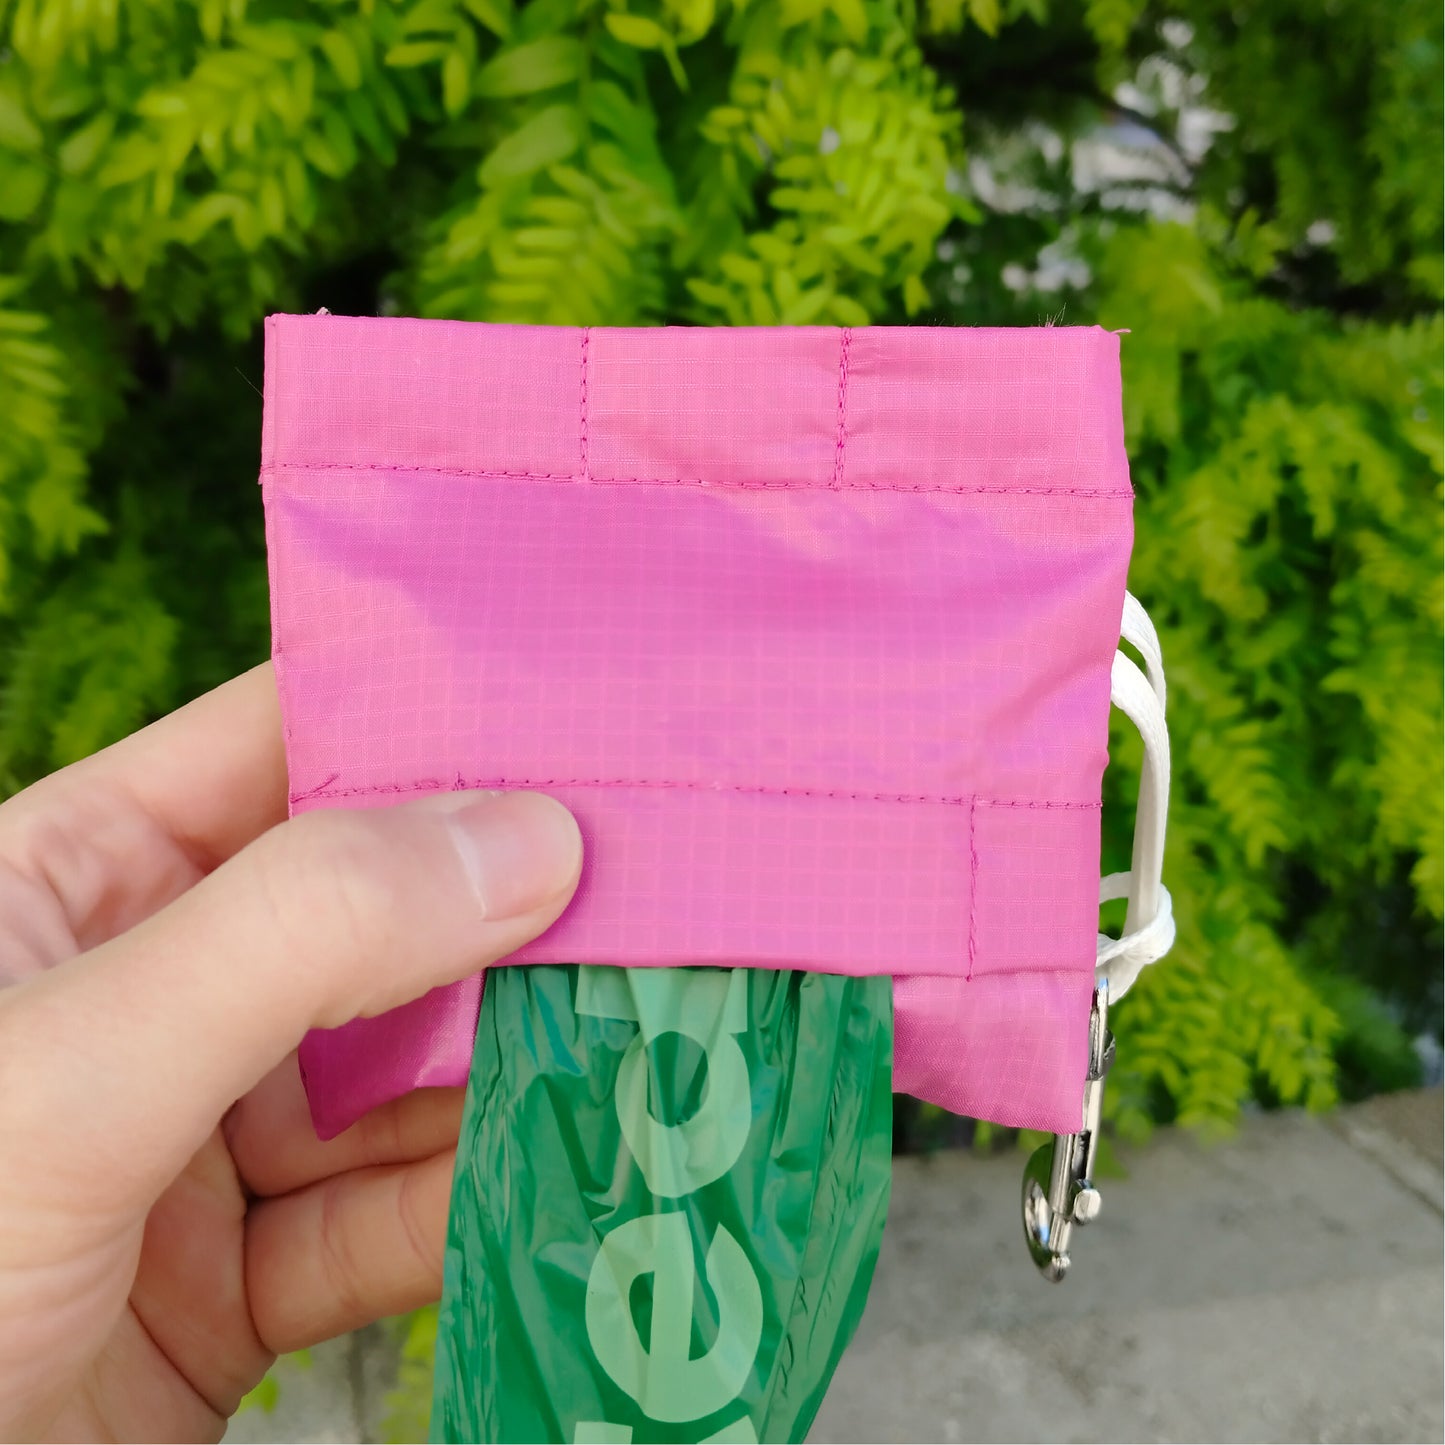 Upcycling "Poo-Bag-Tasche", Pink